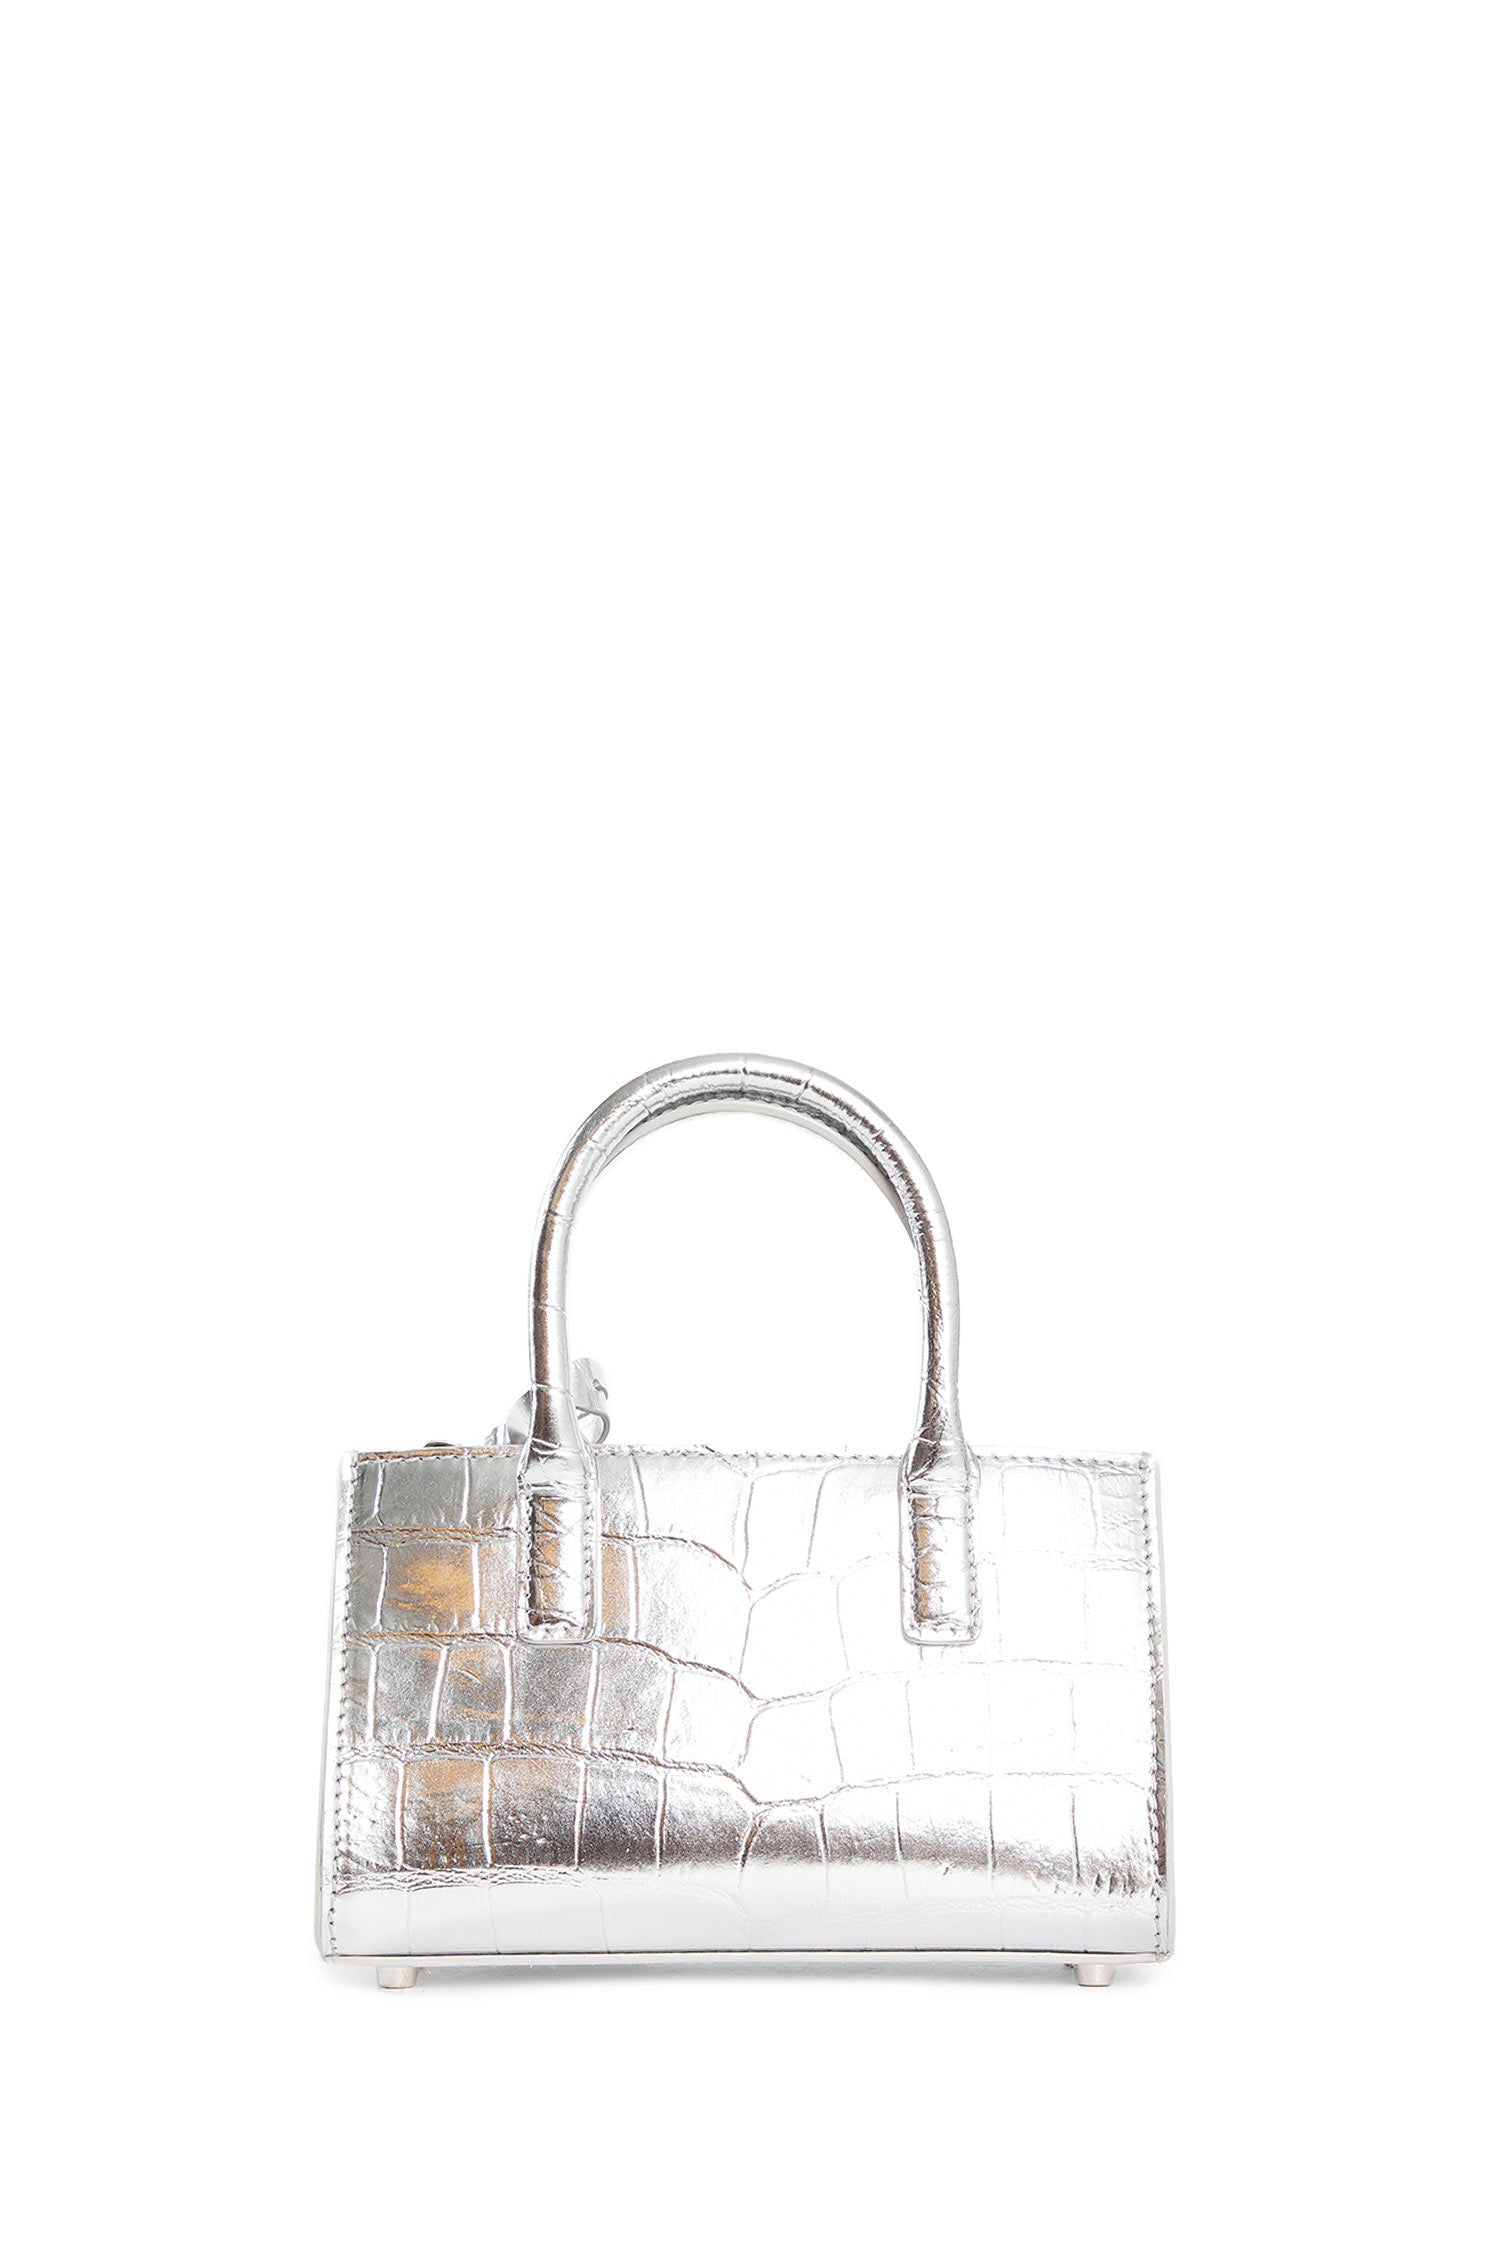 VERSACE WOMAN SILVER TOTE BAGS